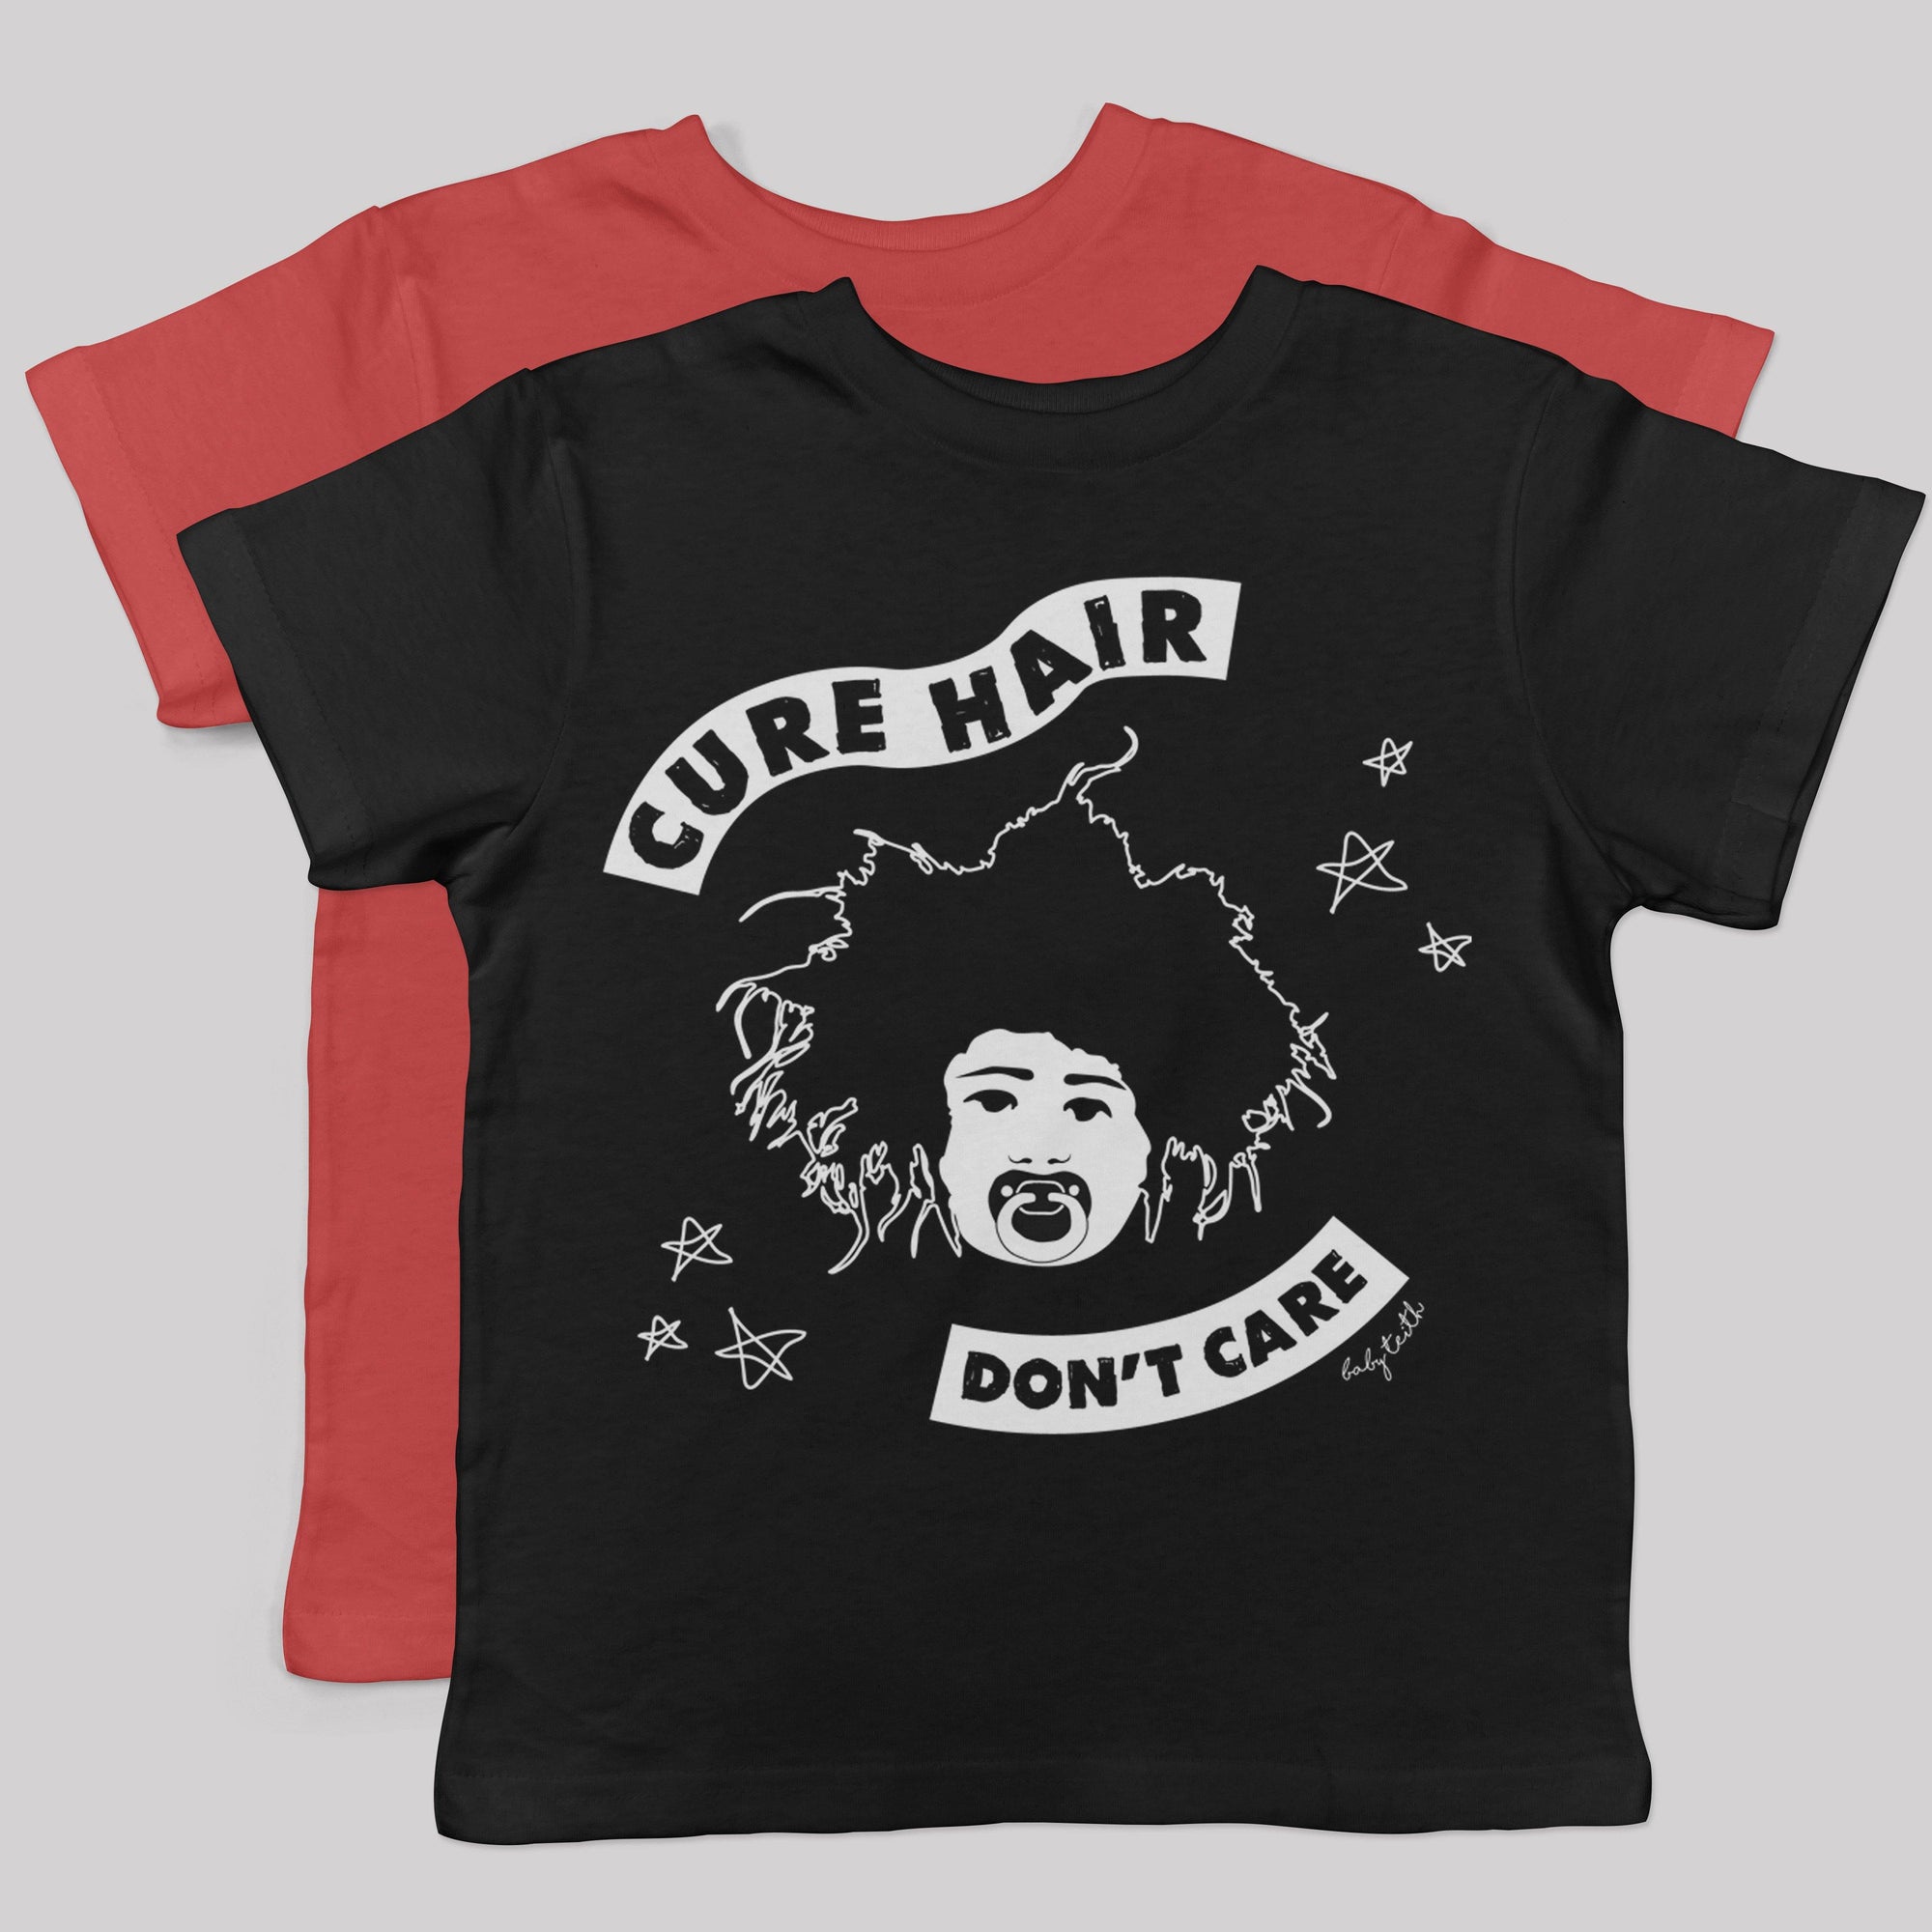 "Cure Hair Don't Care" Tee for Kids - Baby Teith